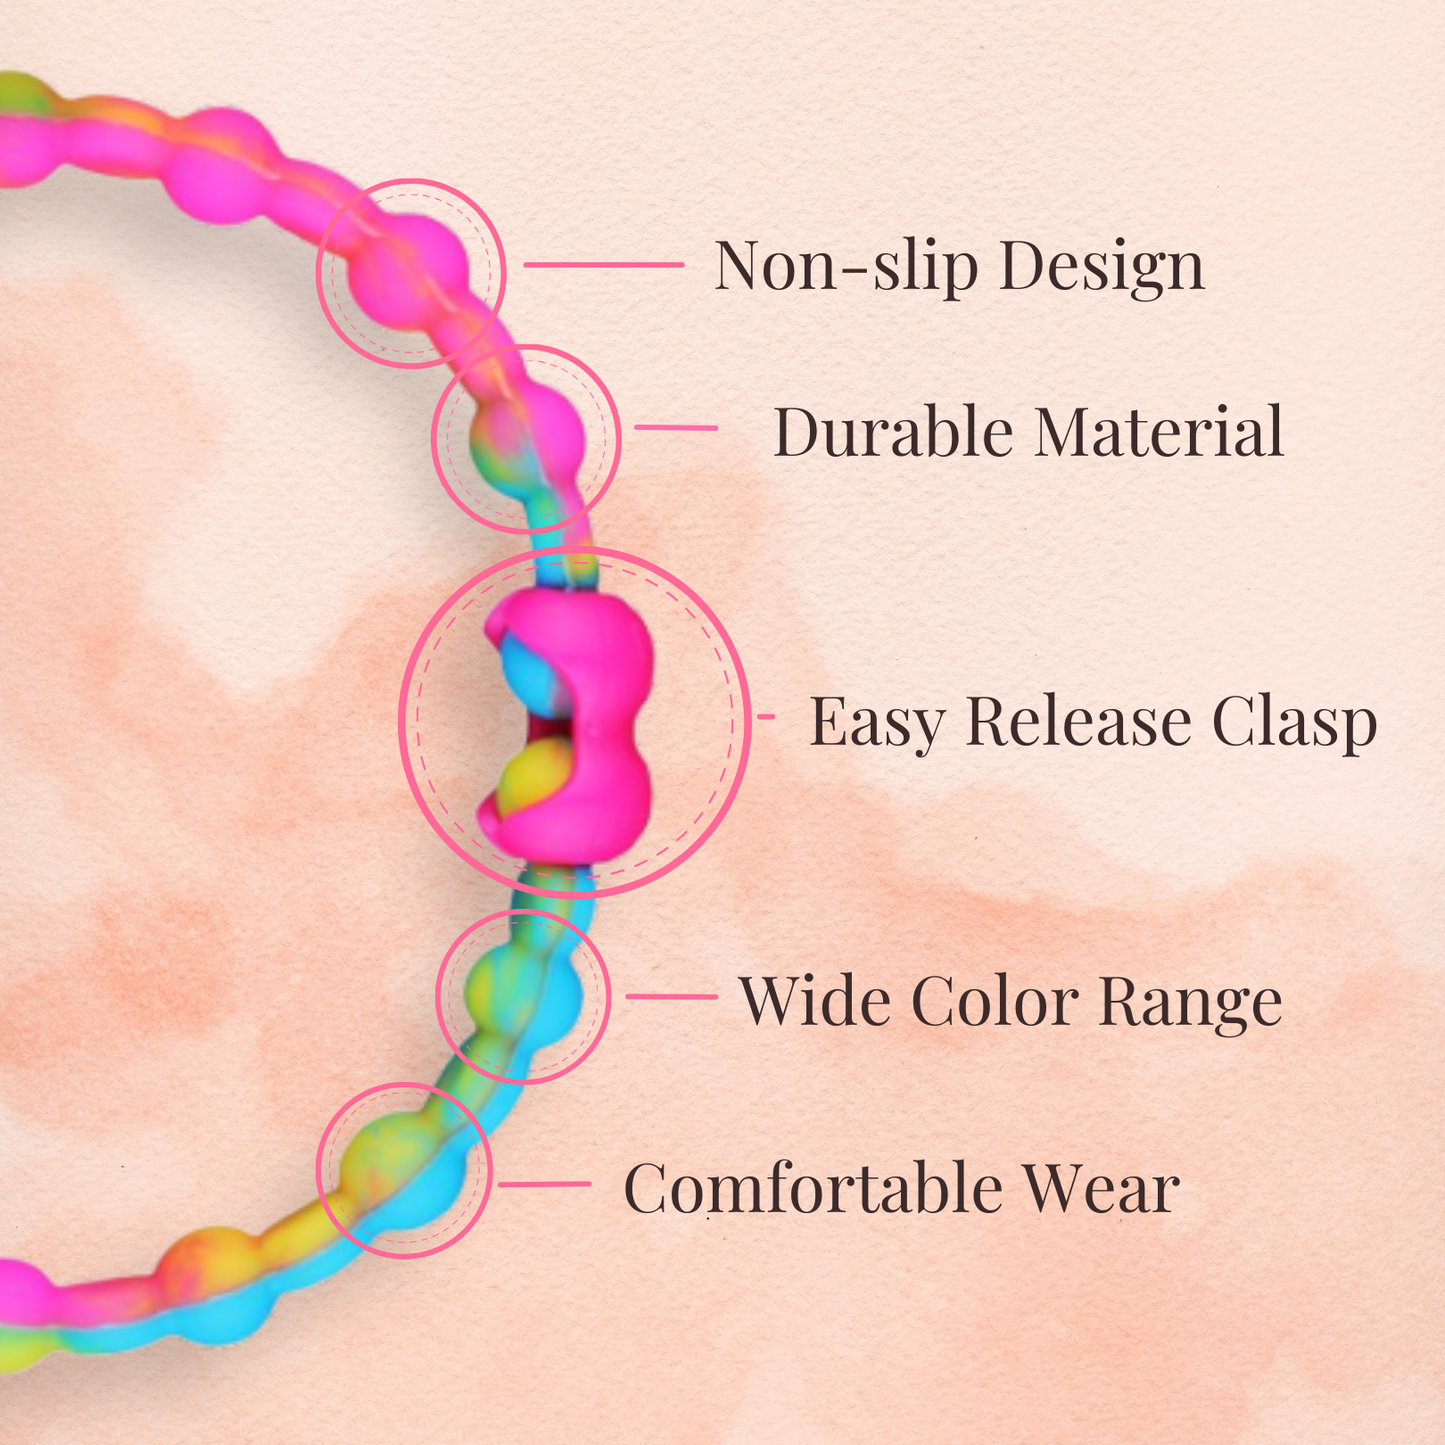 Purple Glow Final Hair Ties (6-Pack) - Shimmering Beauty for Every Occasion